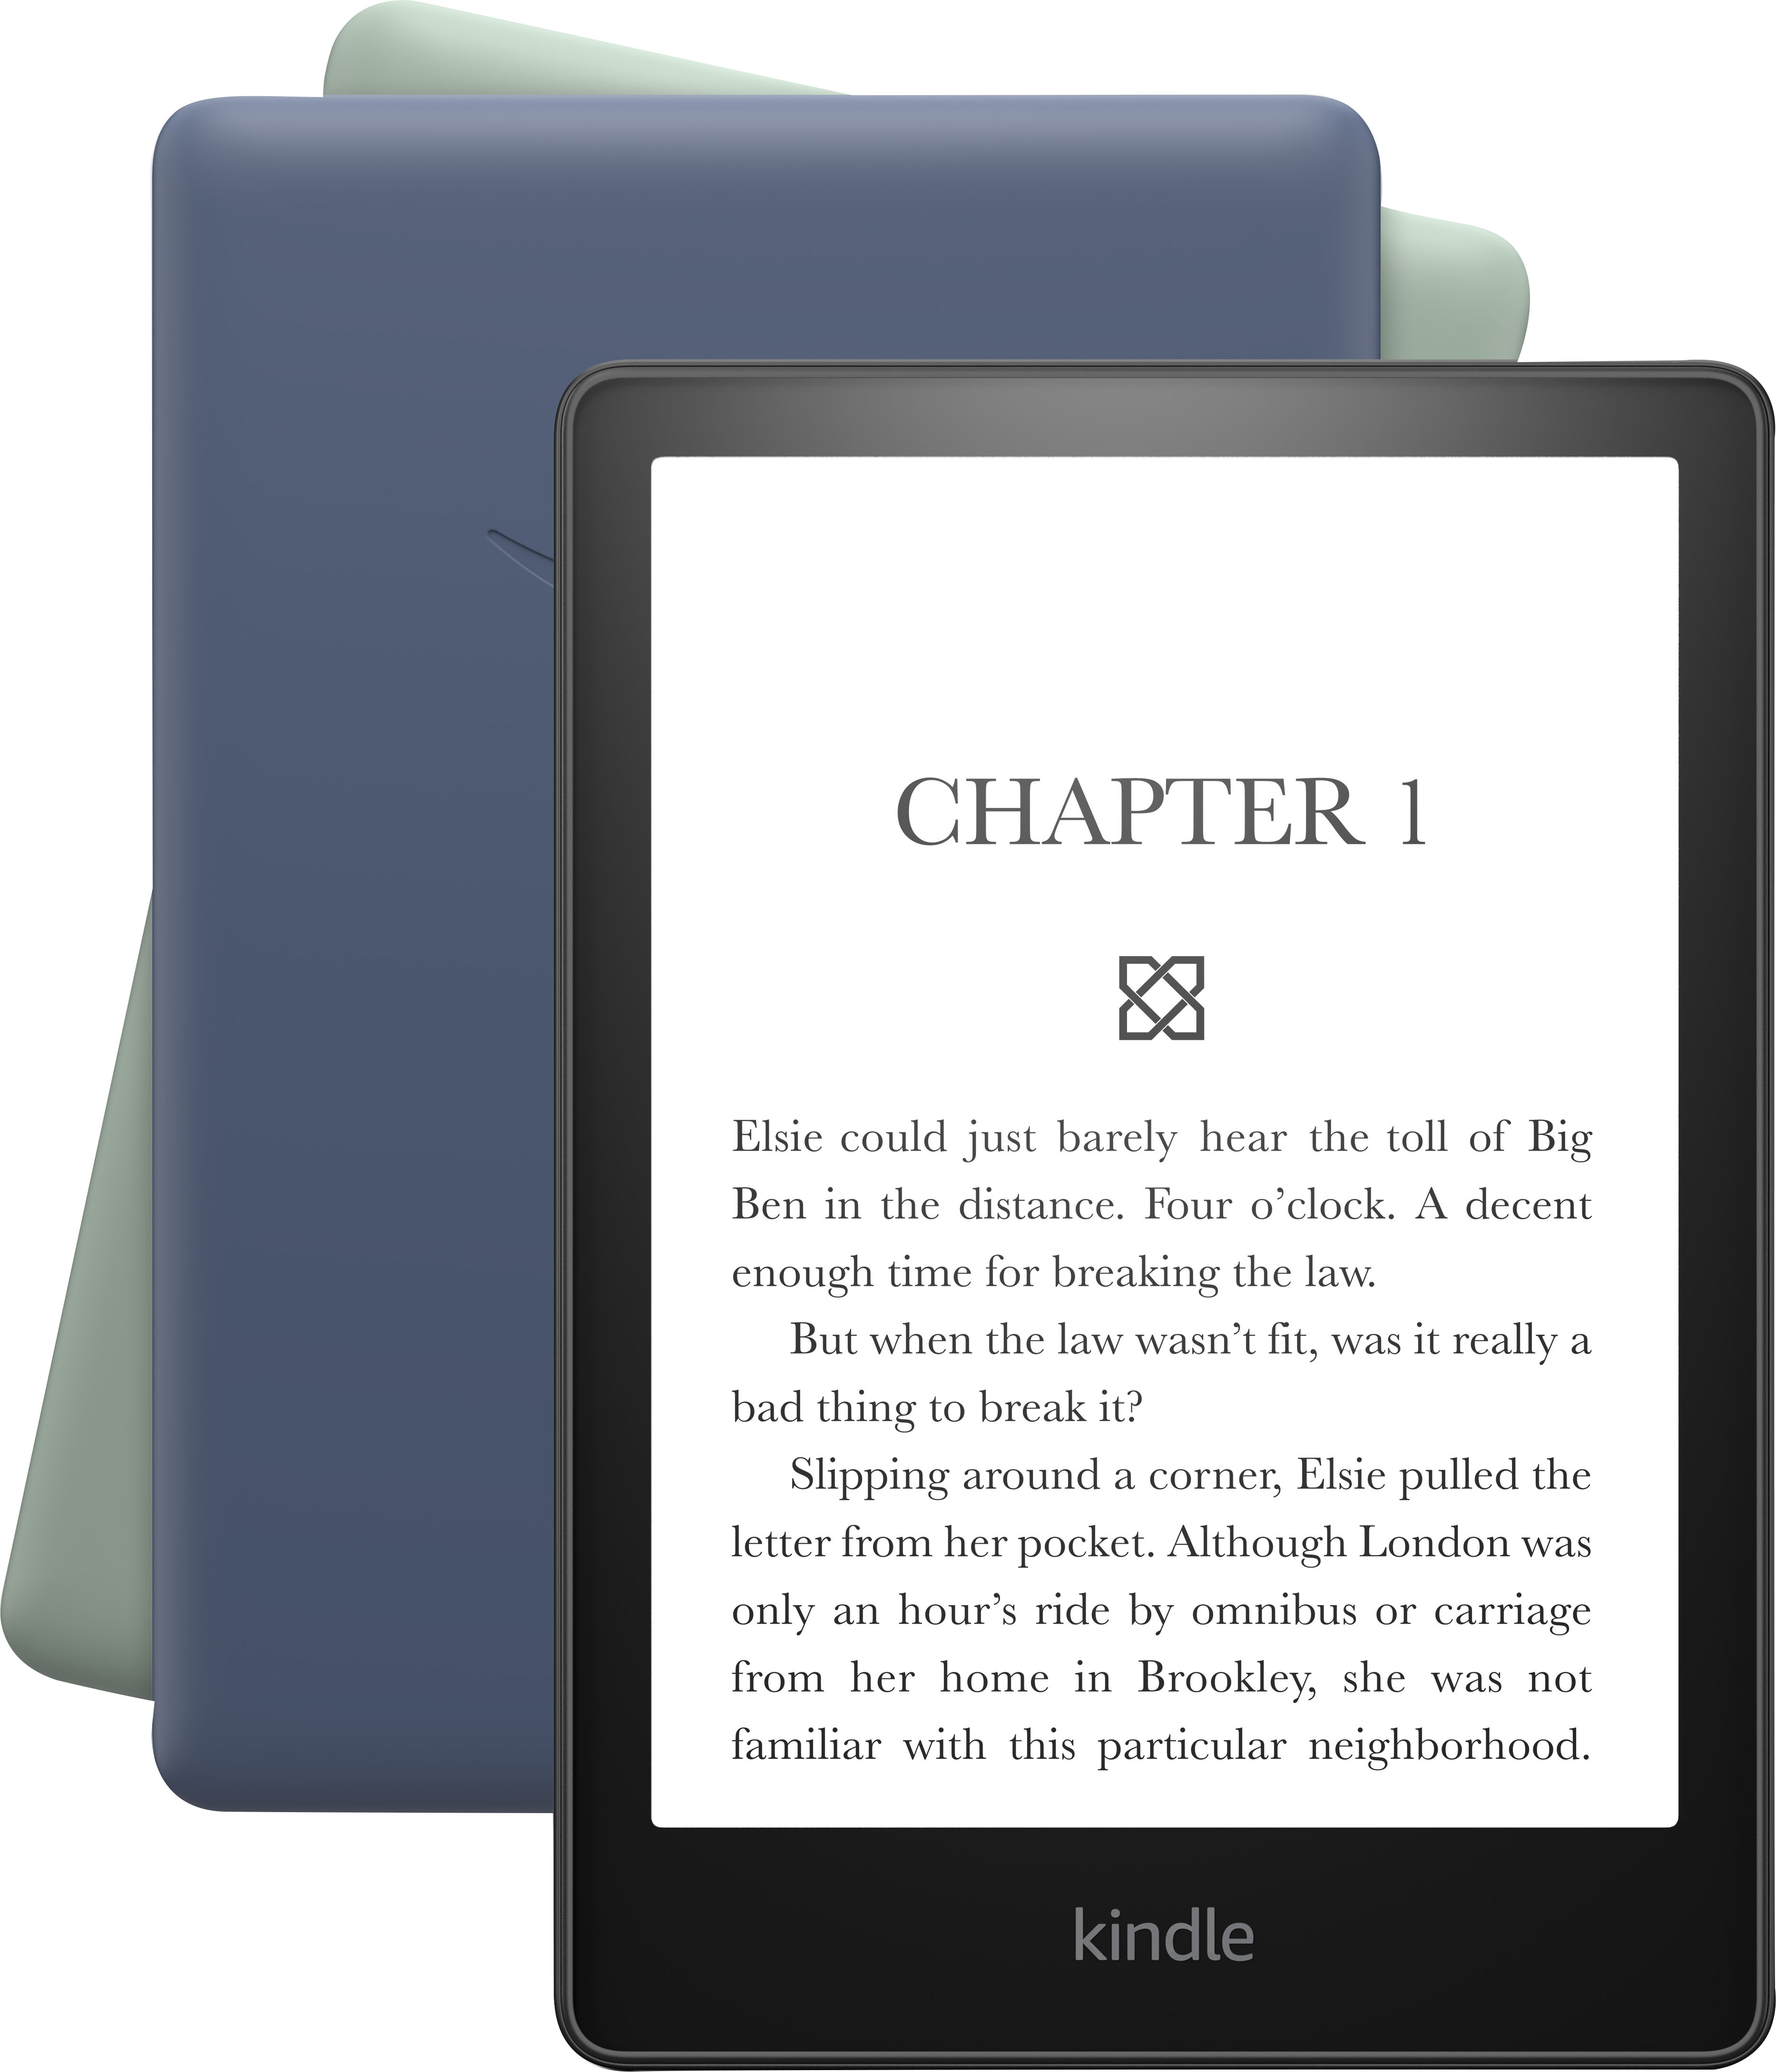 Kindle Paperwhite B07PS737QQ 8GB, Wi-Fi, 6 inch eBook Reader -  Twilight Blue for sale online